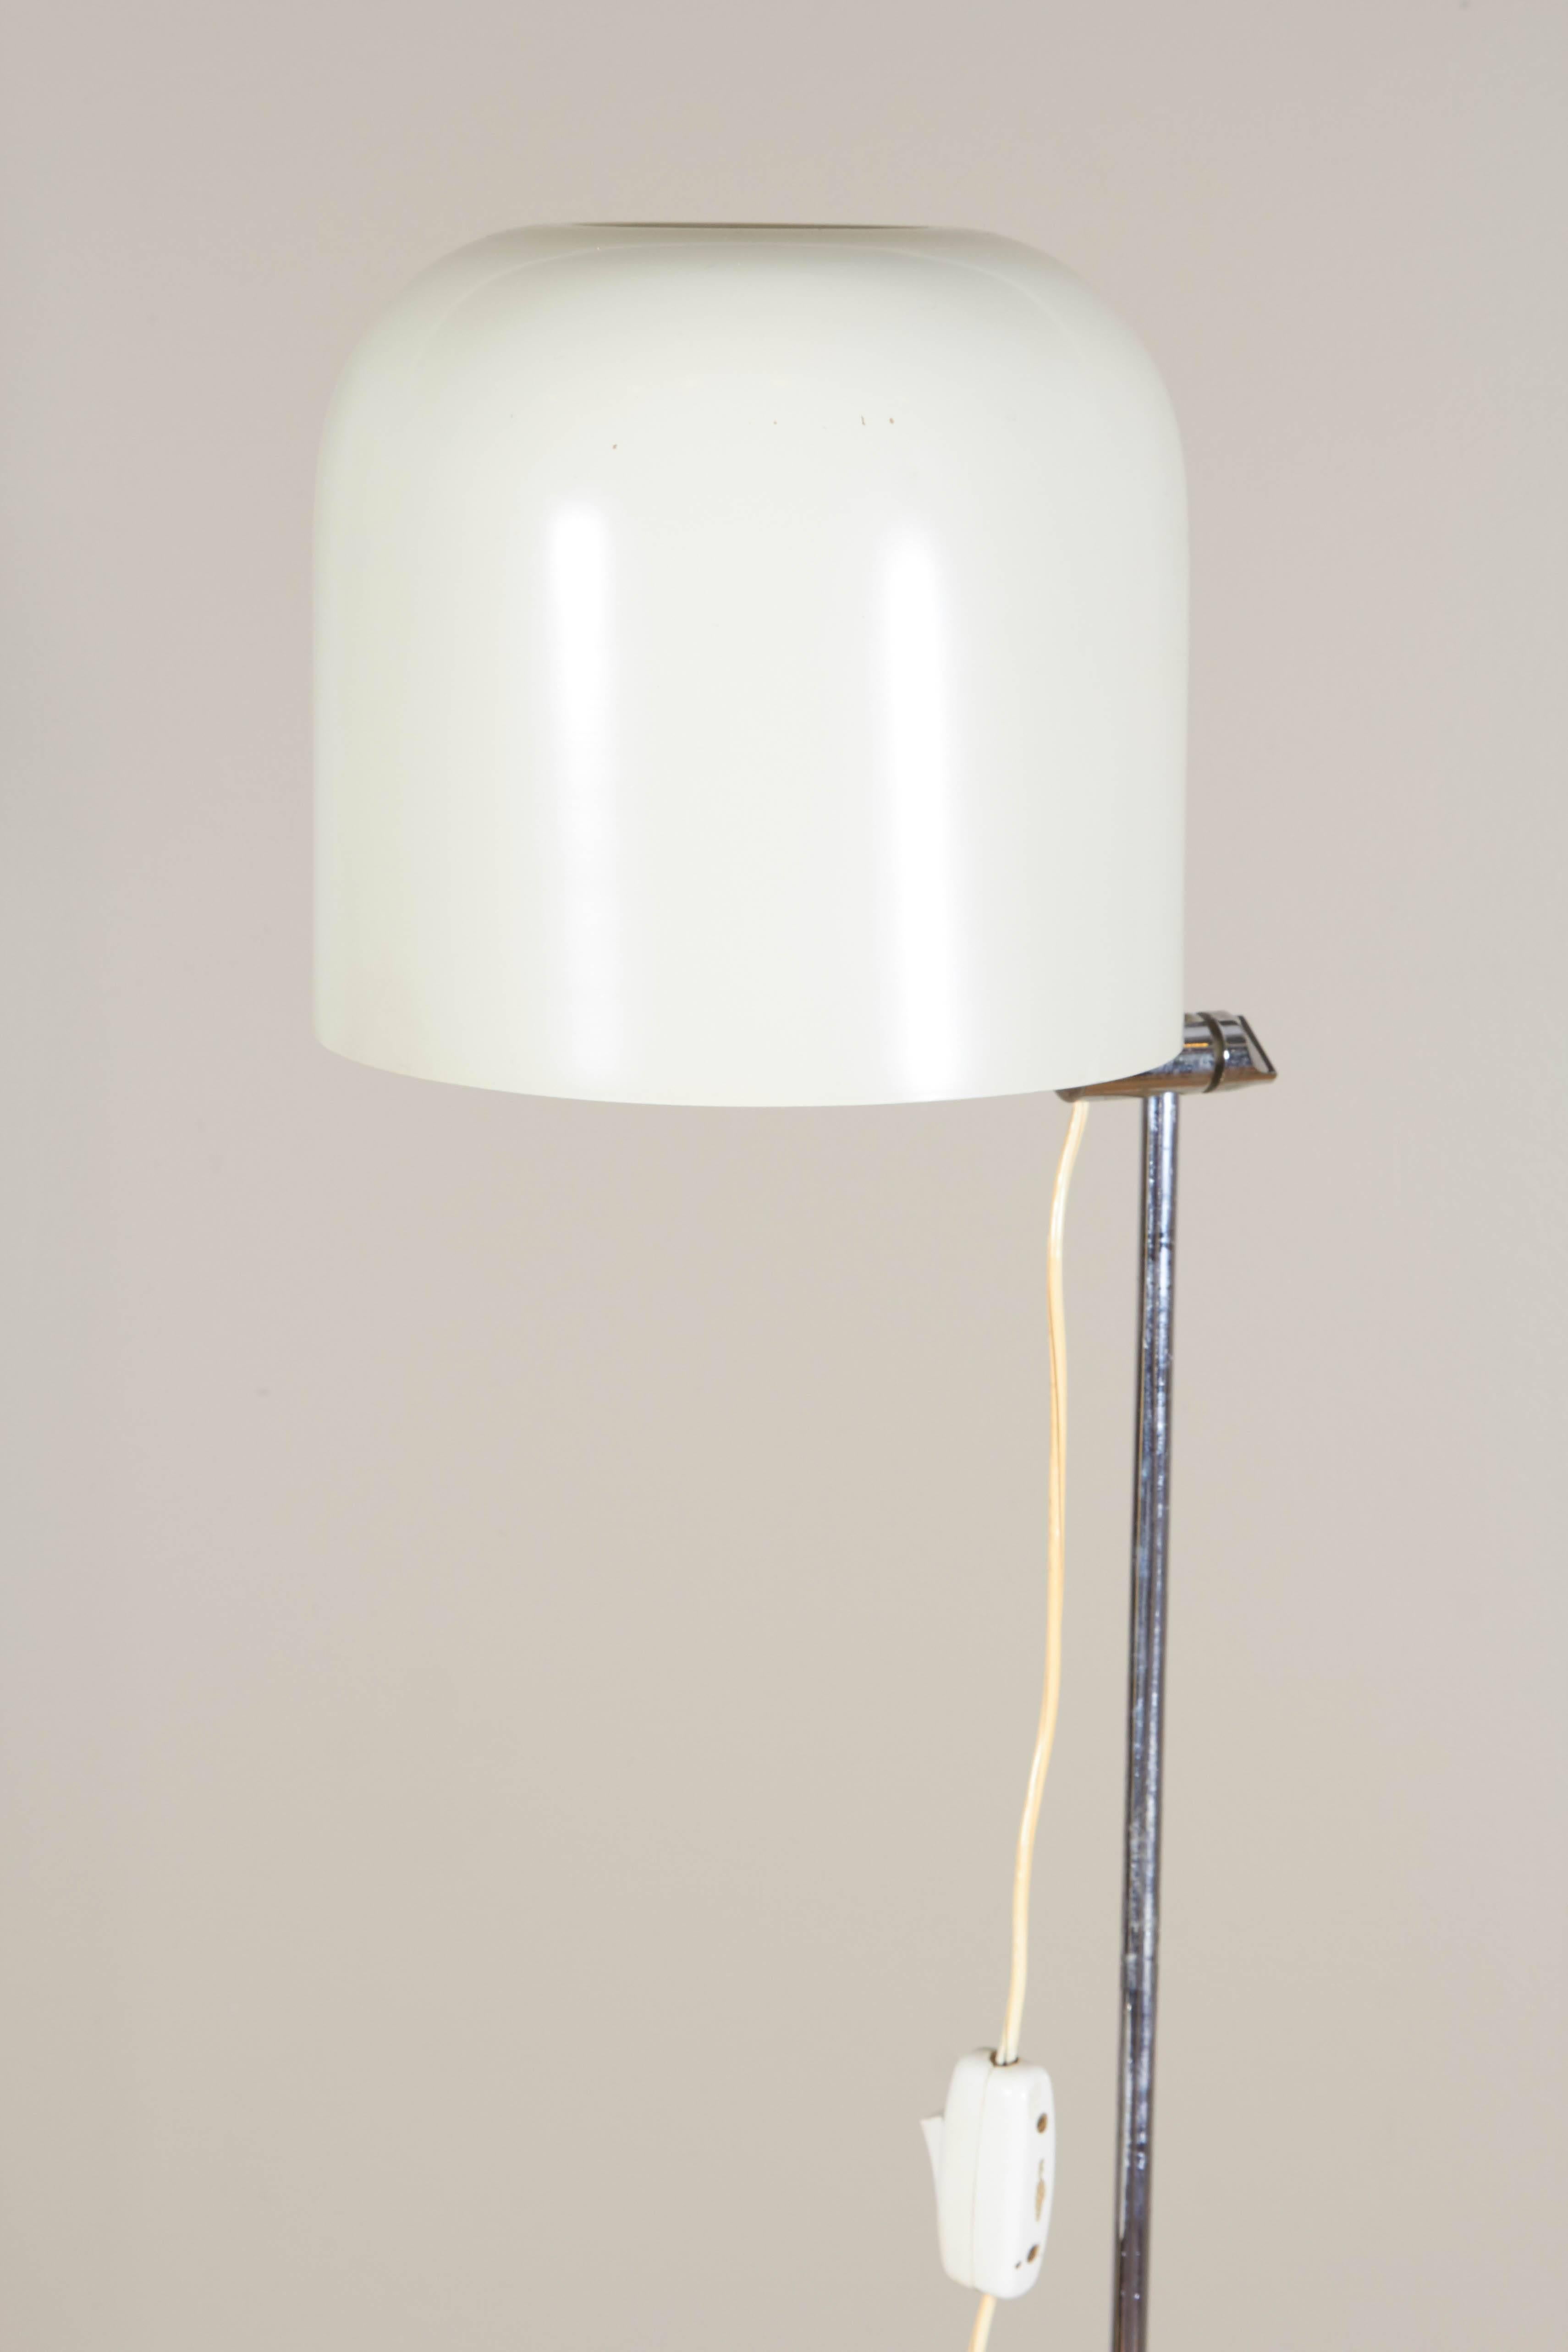 A modernist style floor lamp, manufactured in Spain, circa 1970s, with white enamel rounded shade, adjustable in height, on a chrome stem. Markings include sticker label [Made in Spain] to the shade. Very good vintage condition, wear to base